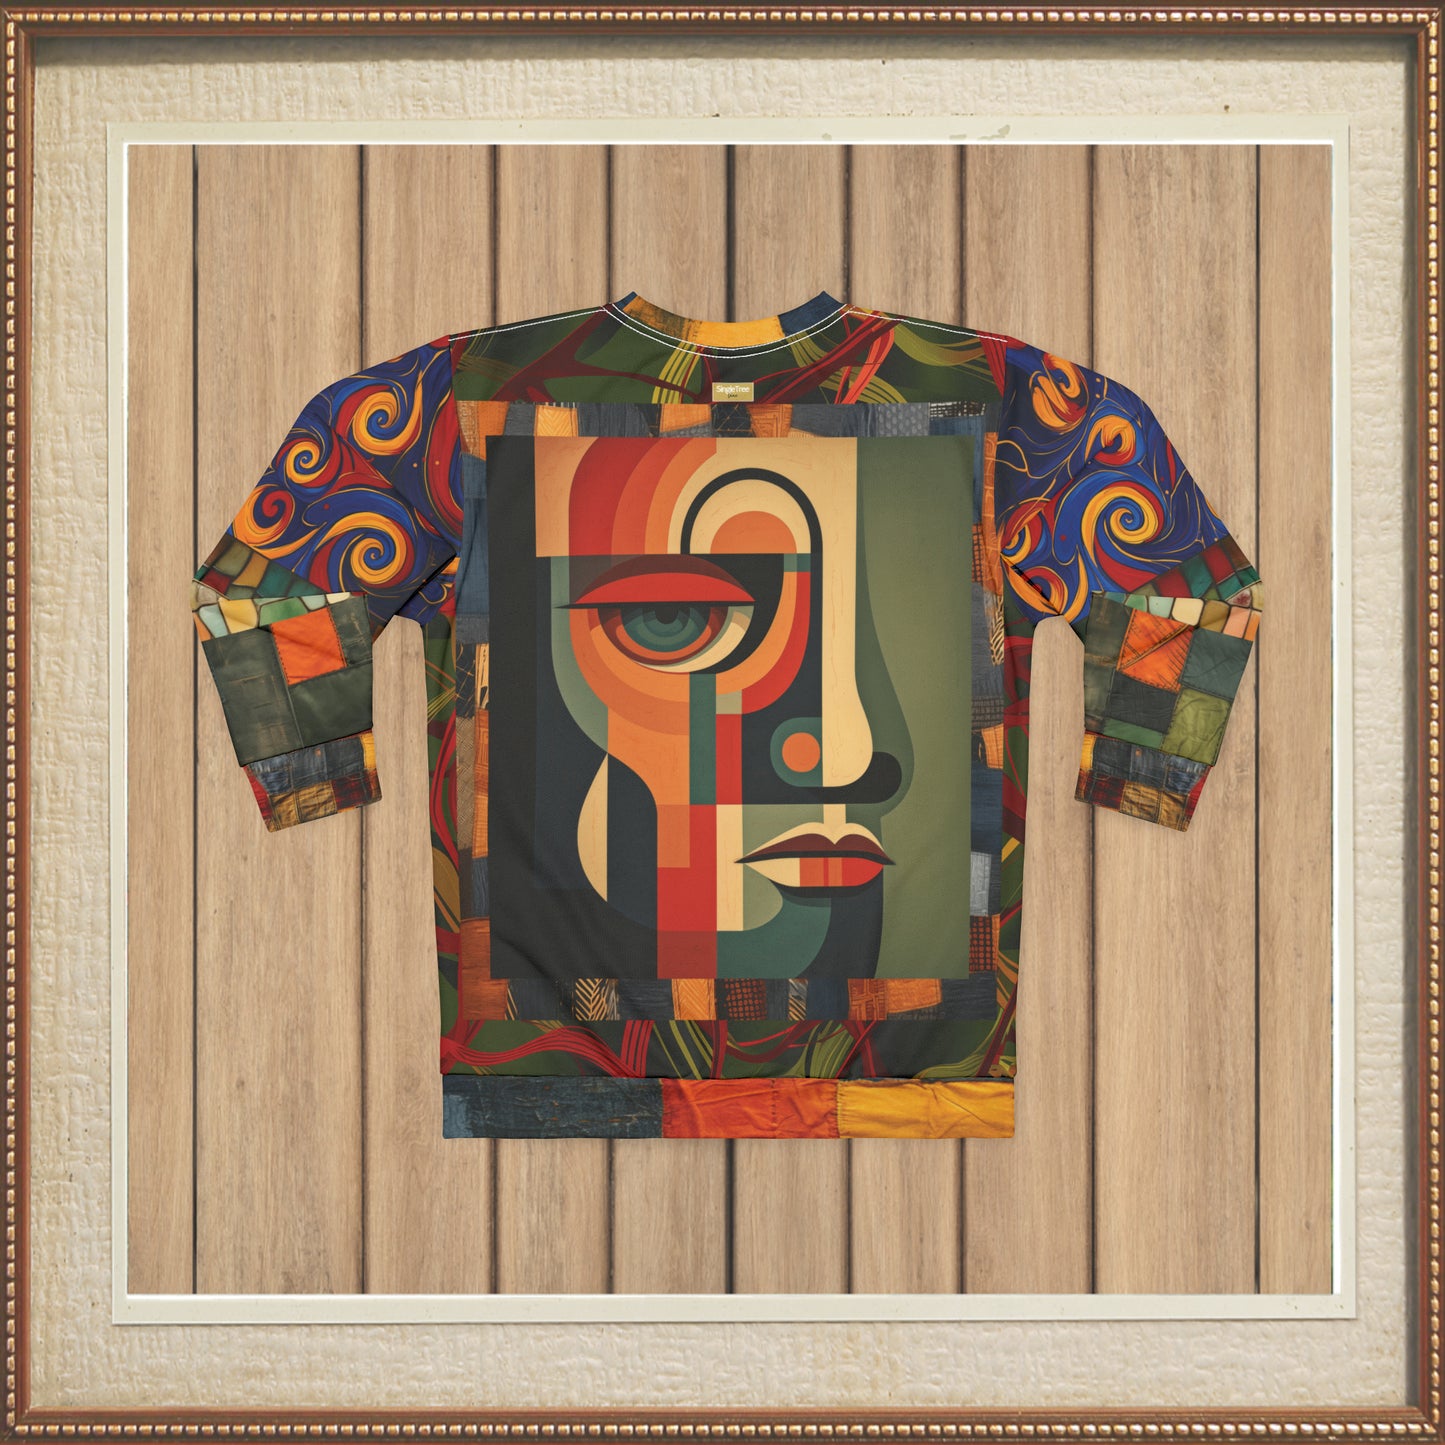 Only Up From Here Abstract Print Unisex Sweatshirt